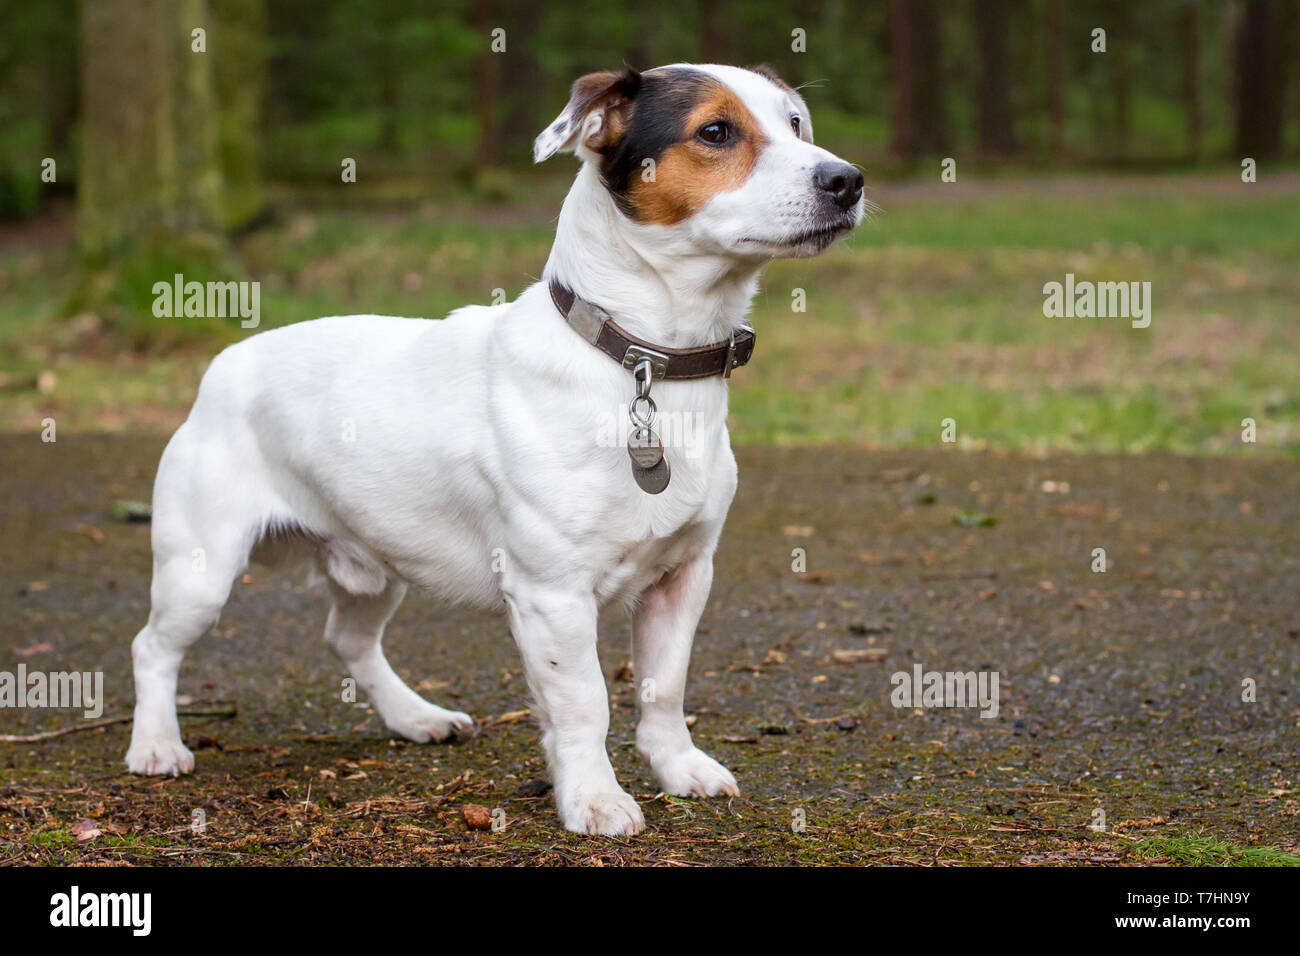 Jack Russell Terrier standing Stock Photo - Alamy